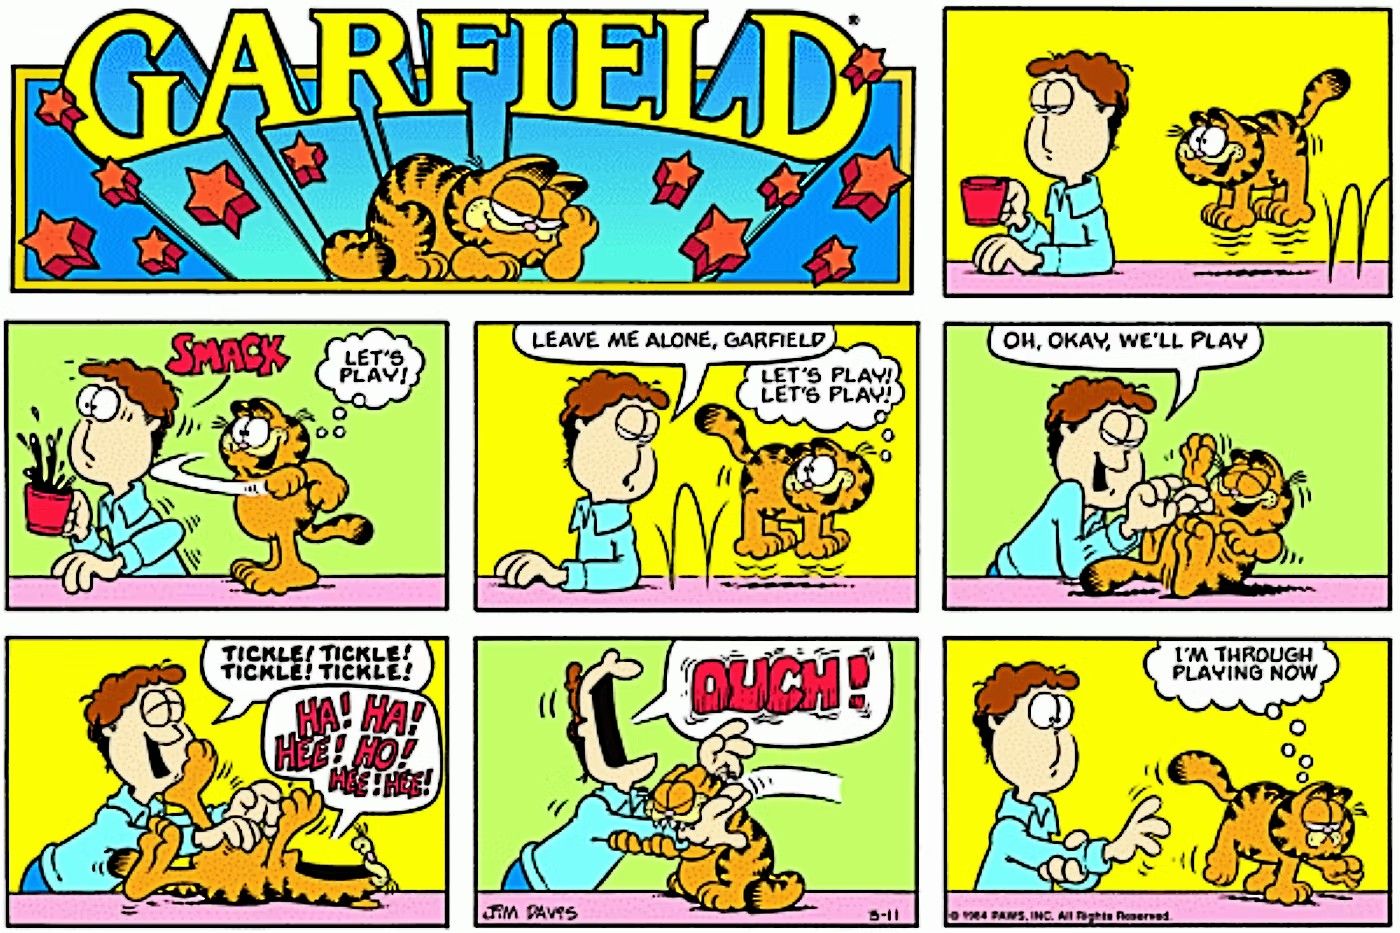 Garfield wants to play with Jon Arbuckle until Jon starts playing, then Garfield attacks